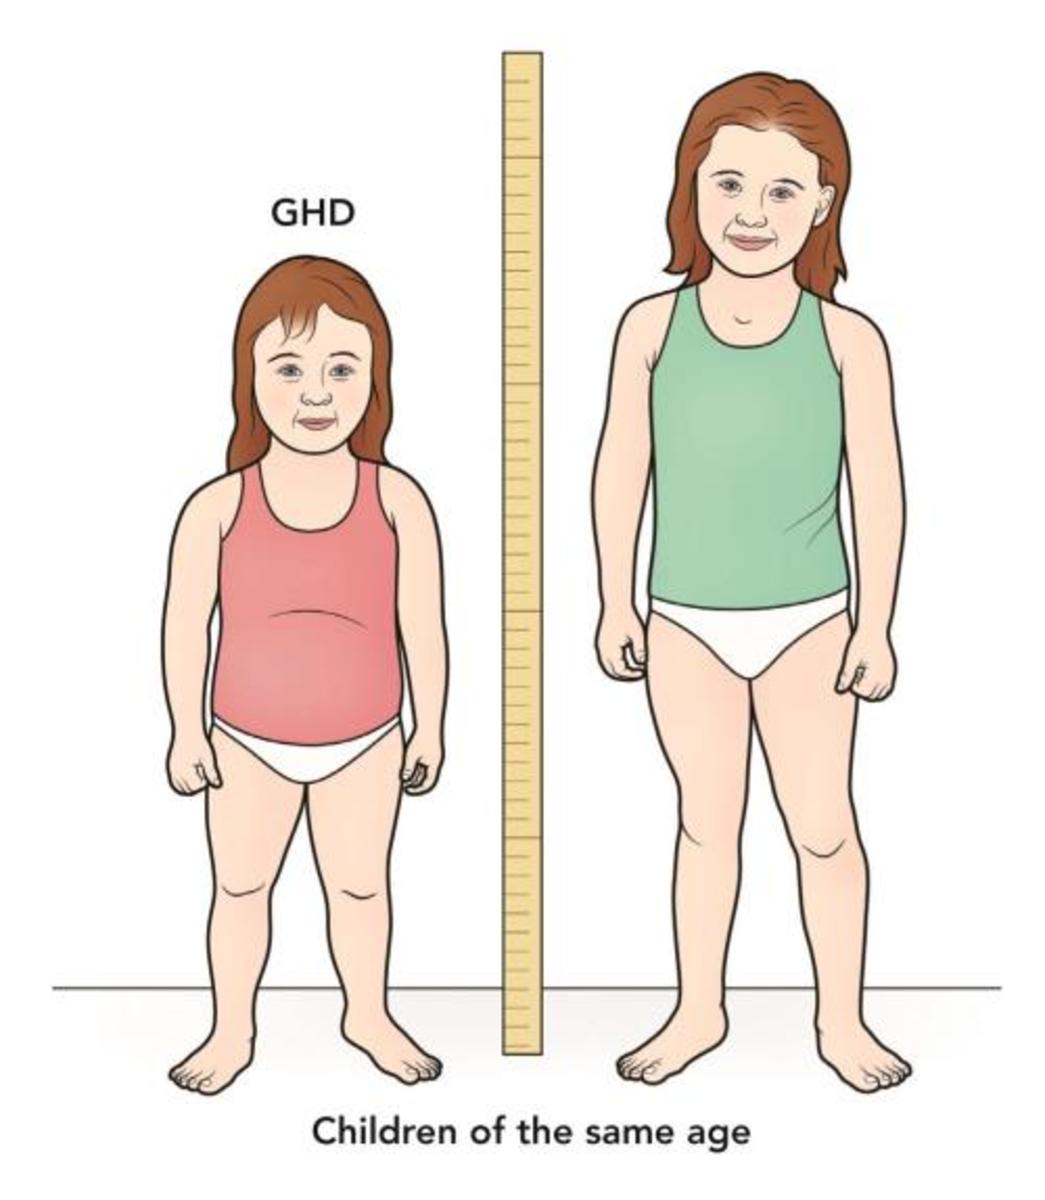 Most children with growth hormone deficiency grow less than 2 inches per year, but in this case the child on the left is much shorter than a child of the same age